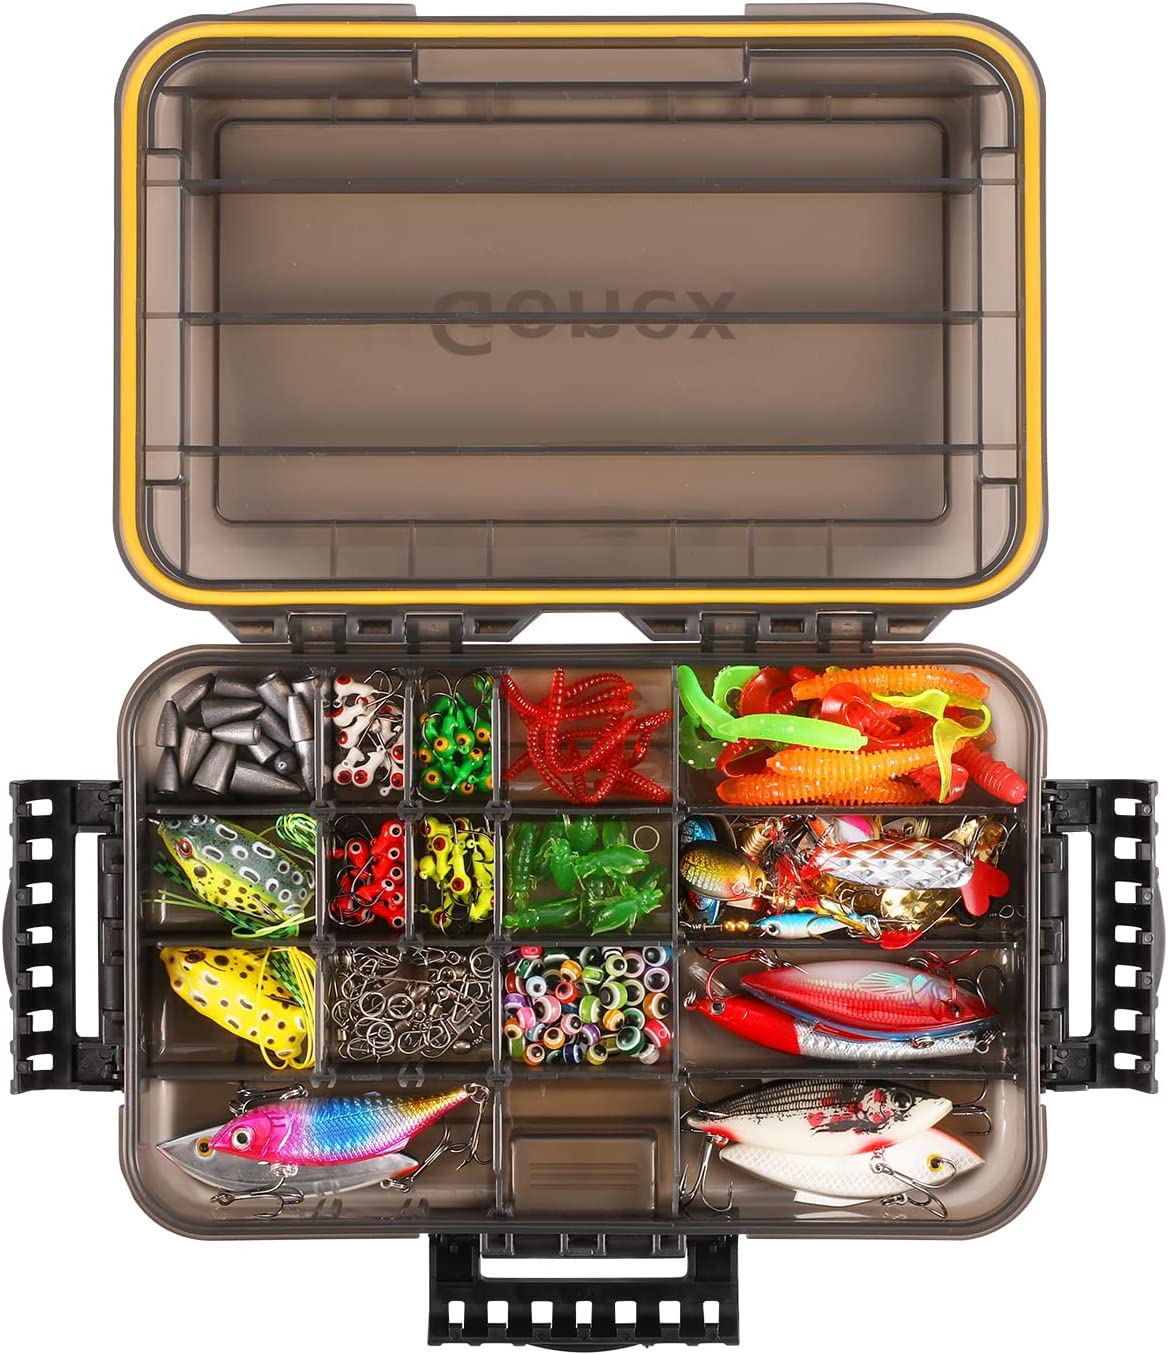 Fishing Tackle Box, Waterproof 3600 and 3700 Tackle Trays, Plastic